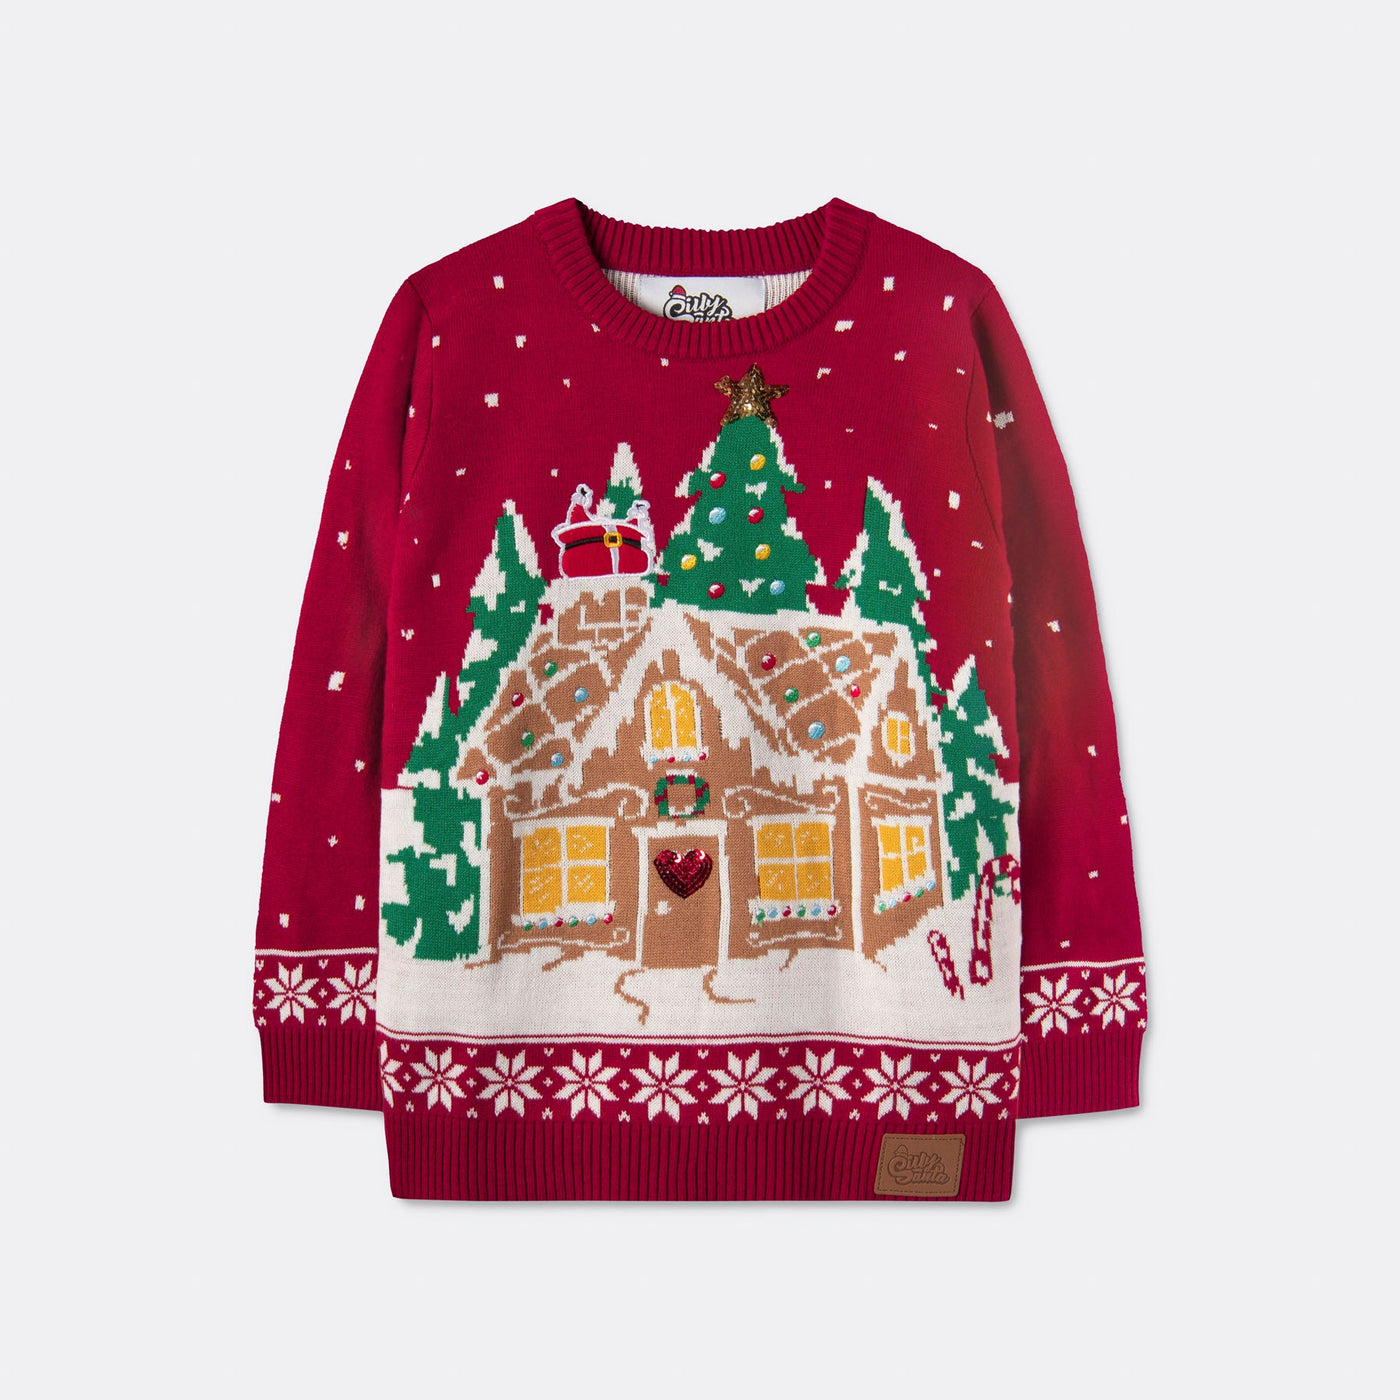 Kids' Gingerbread House Christmas Sweater